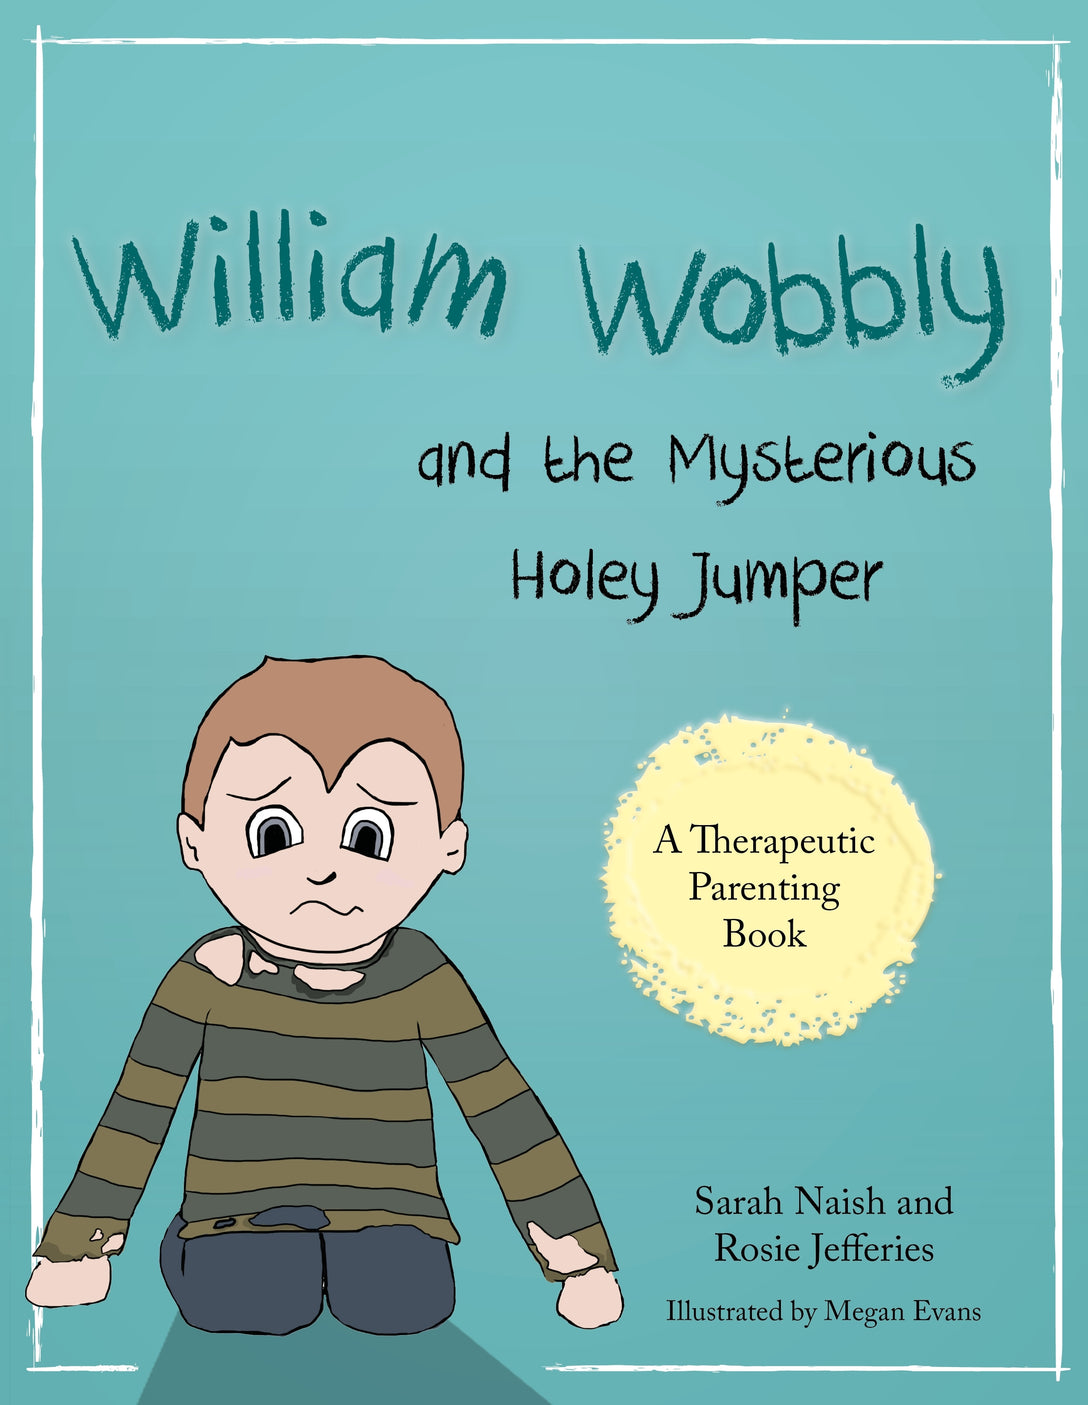 William Wobbly and the Mysterious Holey Jumper by Sarah Naish, Rosie Jefferies, Megan Evans